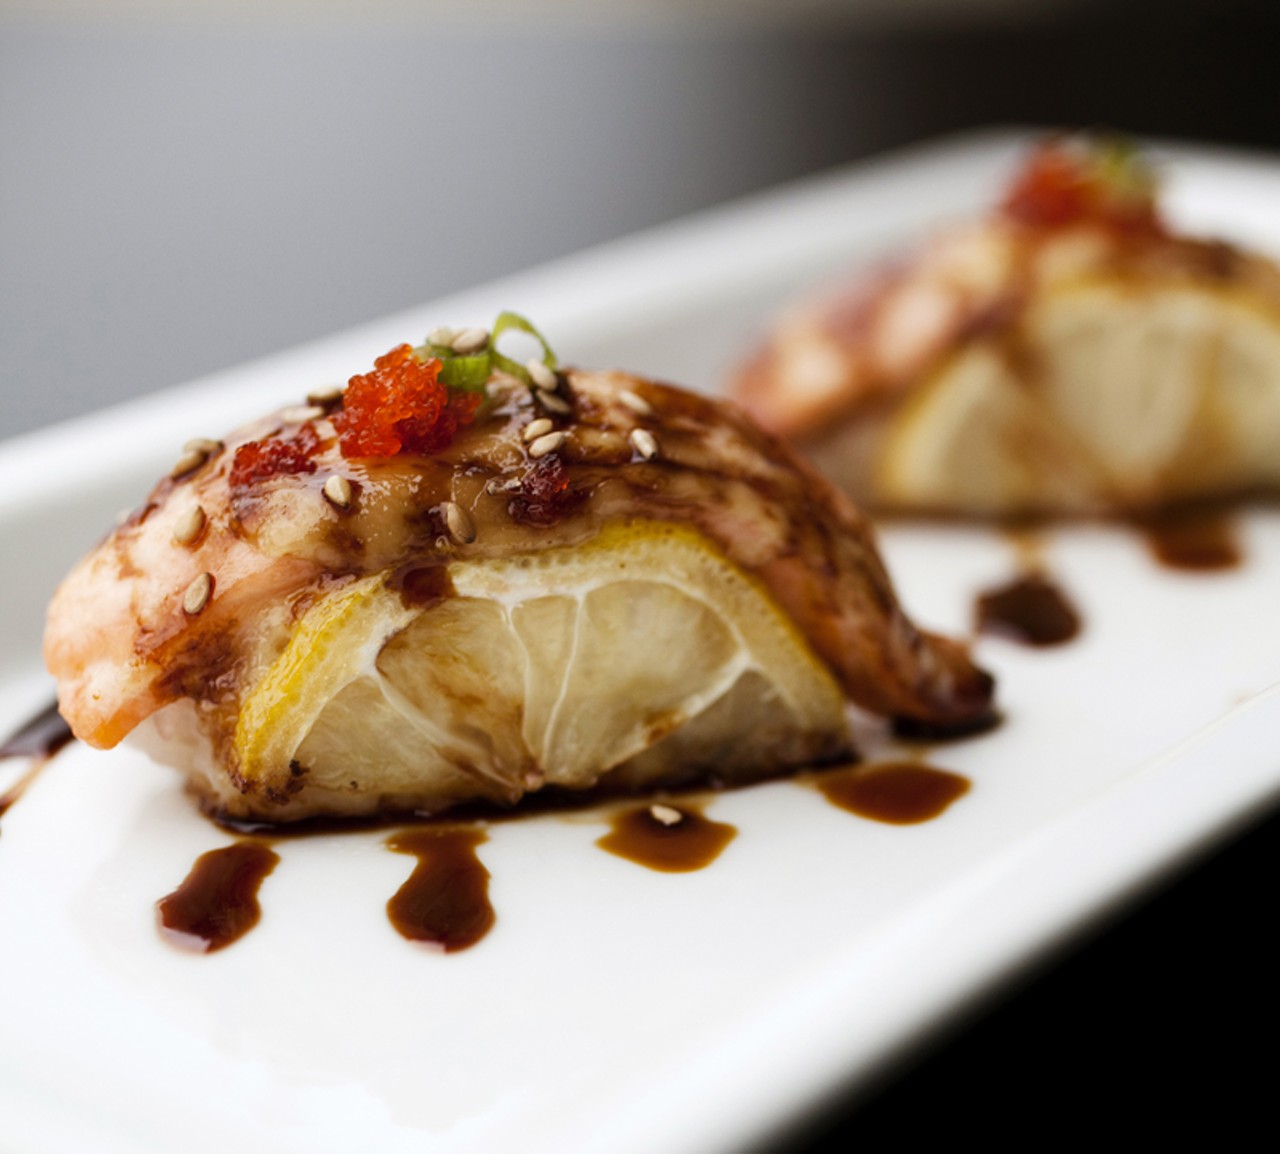 Baked salmon sushi is not a regular menu item, but available upon request for those who don't want raw fish.